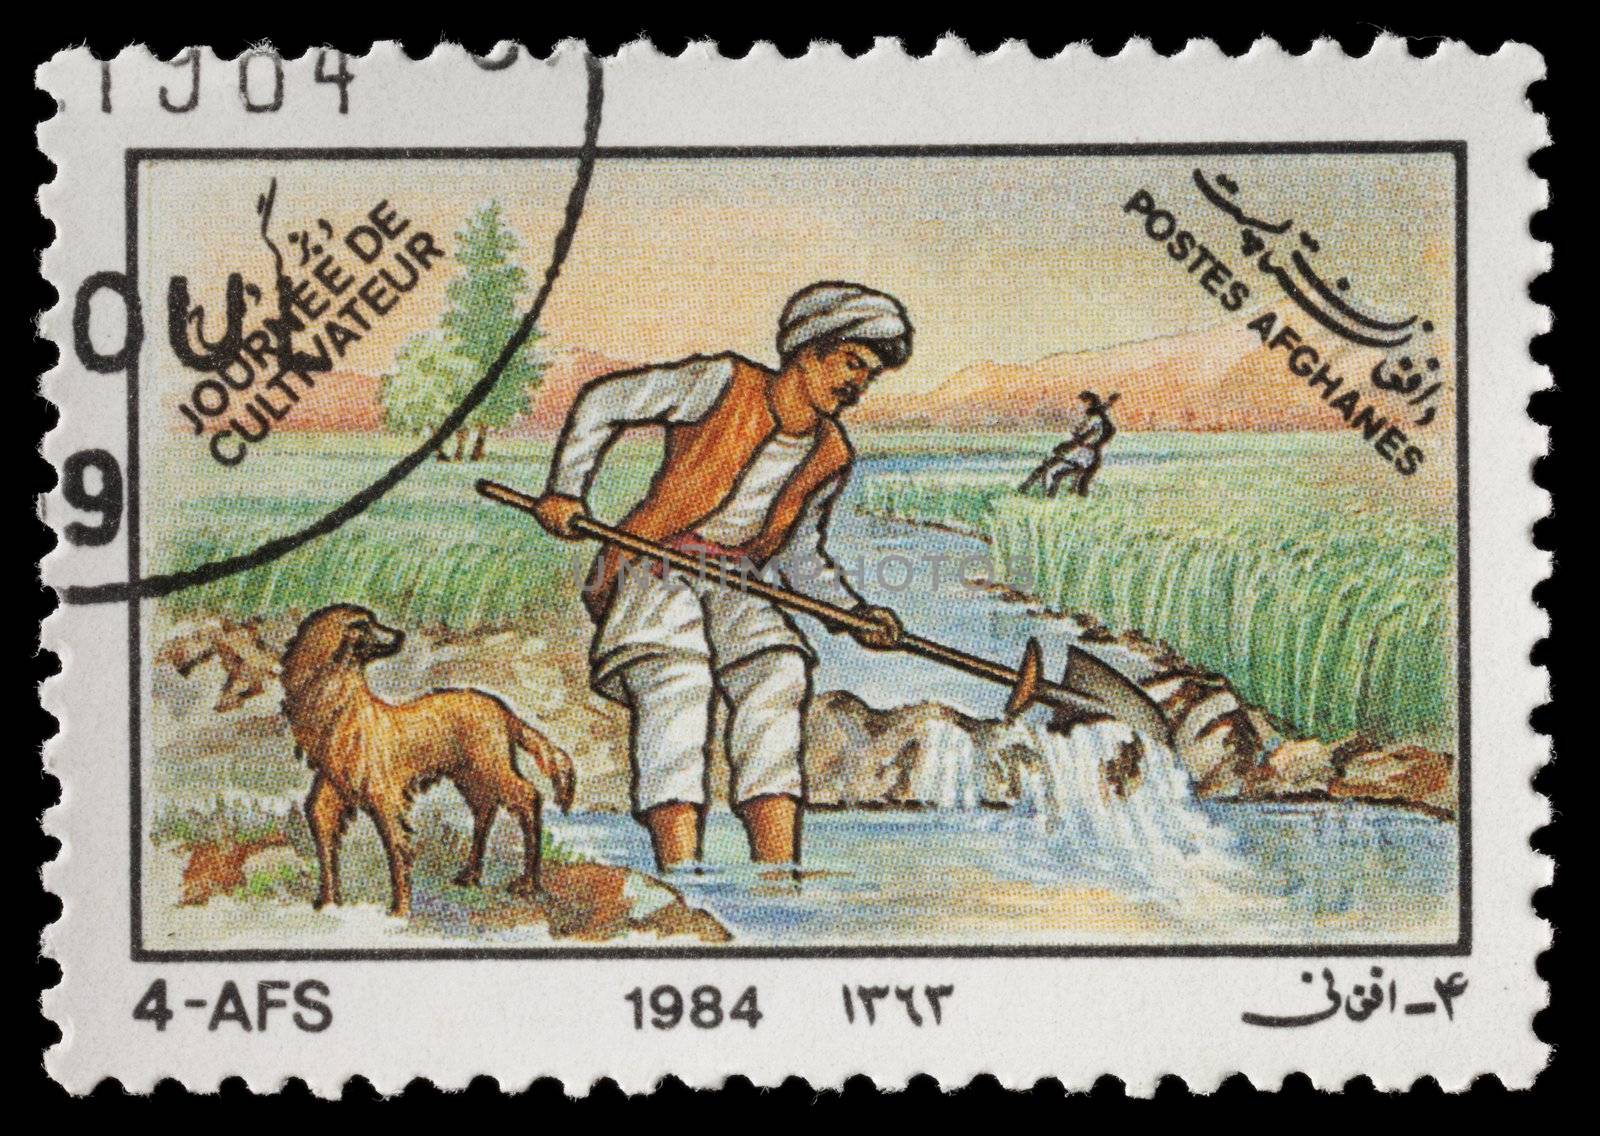 Afghan Stamp by Stocksnapper